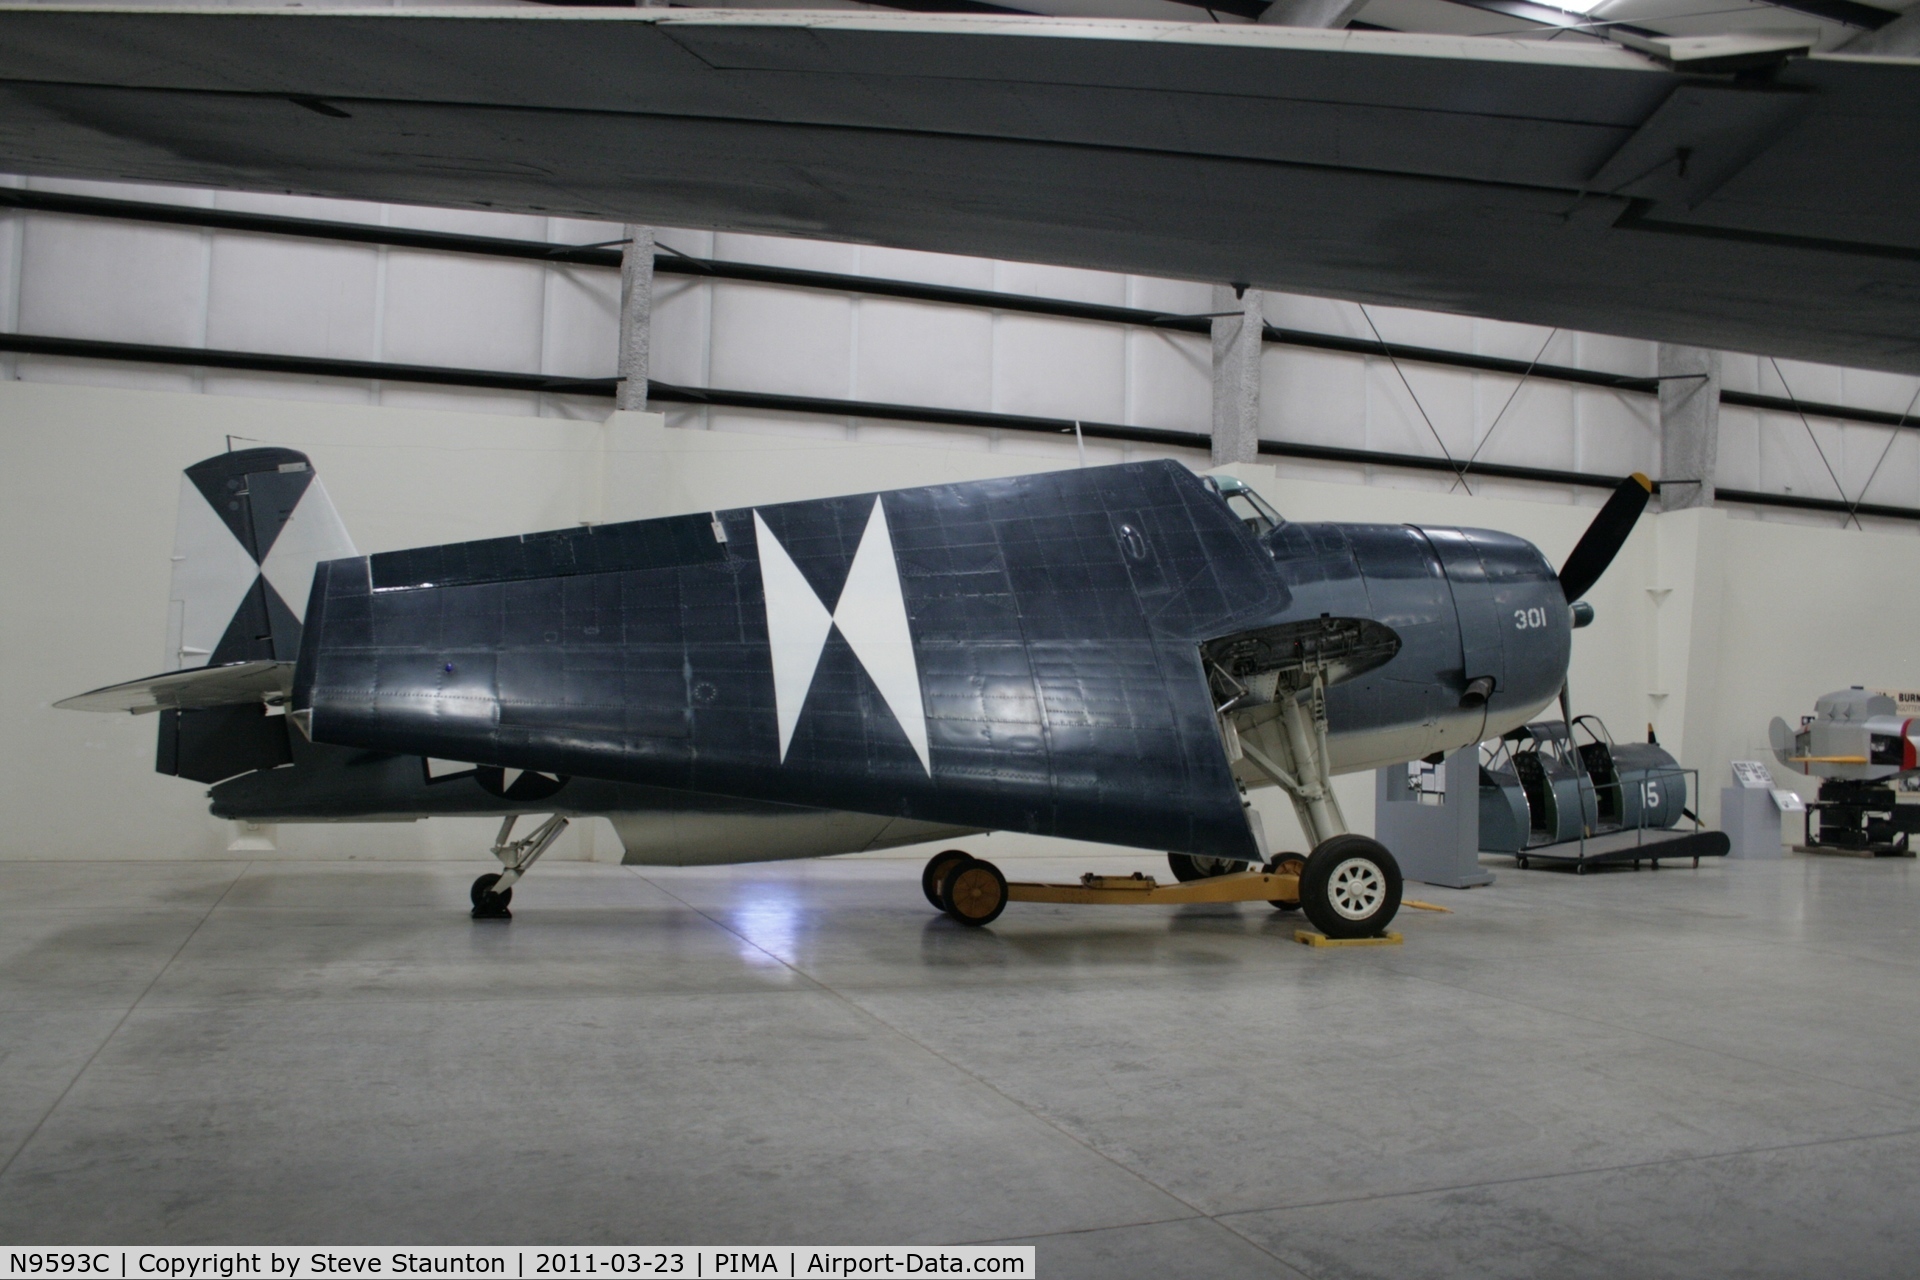 N9593C, Grumman TBM-3 Avenger C/N 69472/2211, Taken at Pima Air and Space Museum, in March 2011 whilst on an Aeroprint Aviation tour